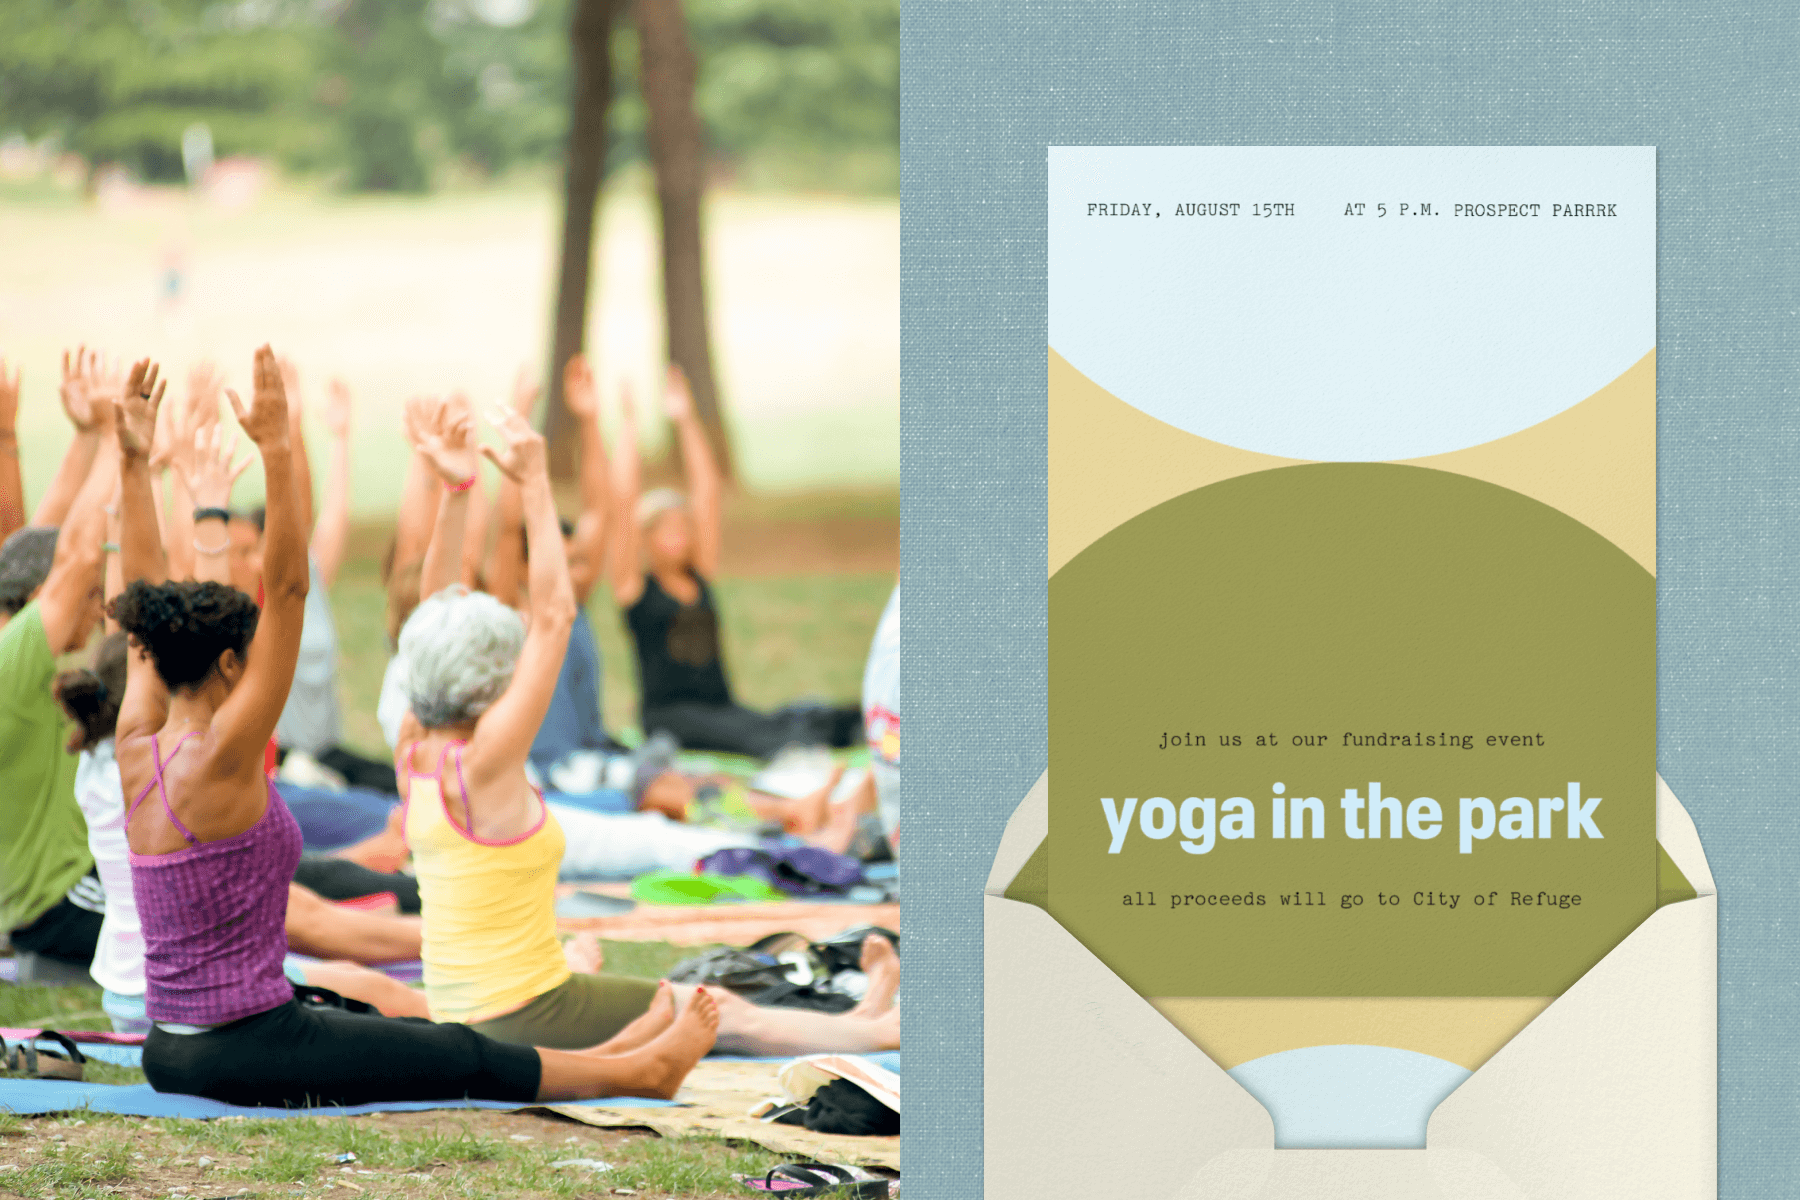 Left: People doing yoga in a park. Right: An invitation for yoga in the park with large green and white circles extending off the frame to create abstract shapes.